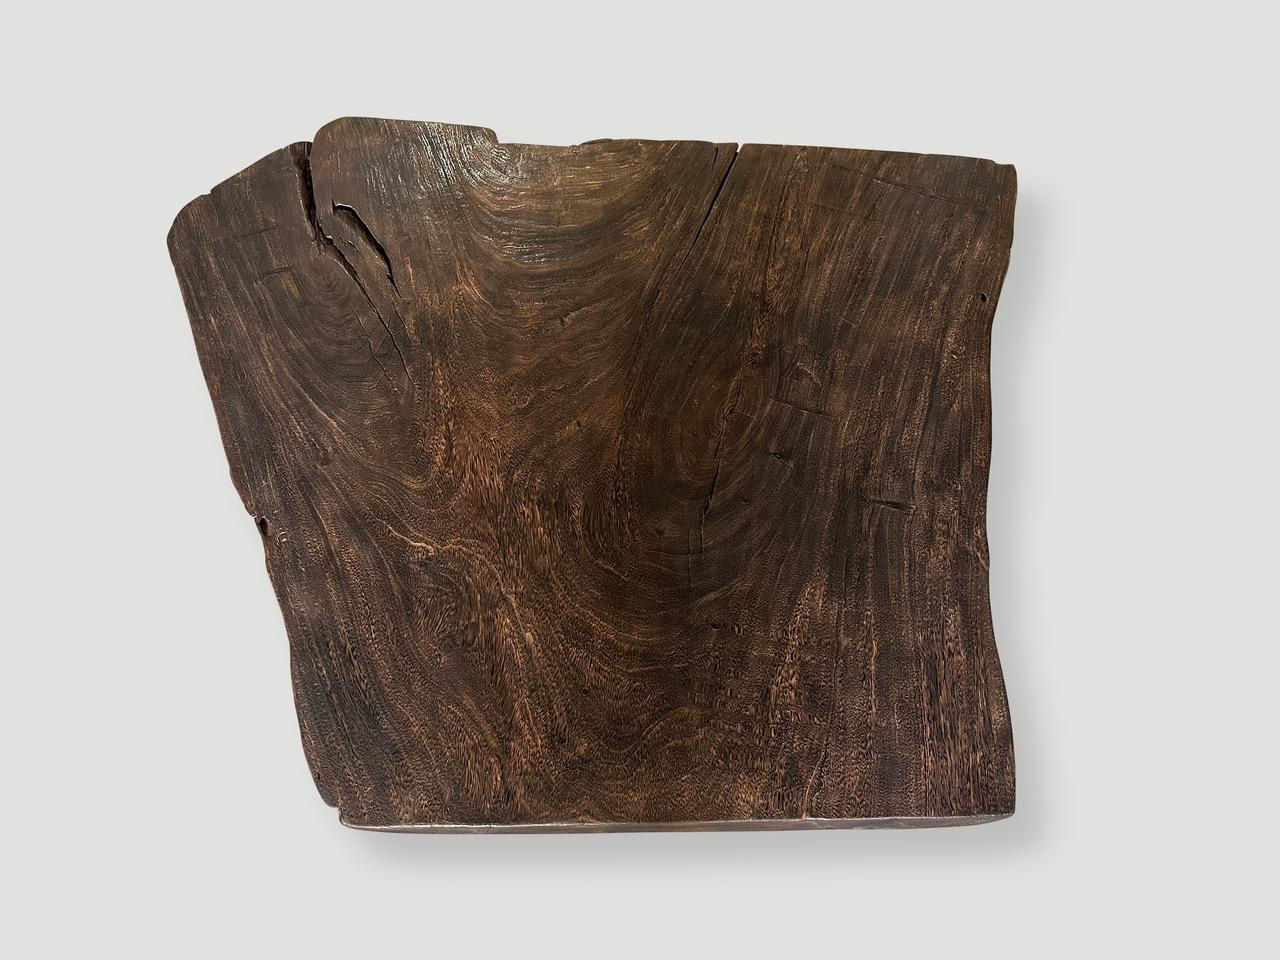 Beautiful live edge coffee table produced from a single three inch thick suar wood slab. Charred one time revealing the stunning wood grain. We added mid century style cone legs and butterfly inlays to the edge. It’s all in the details. Full